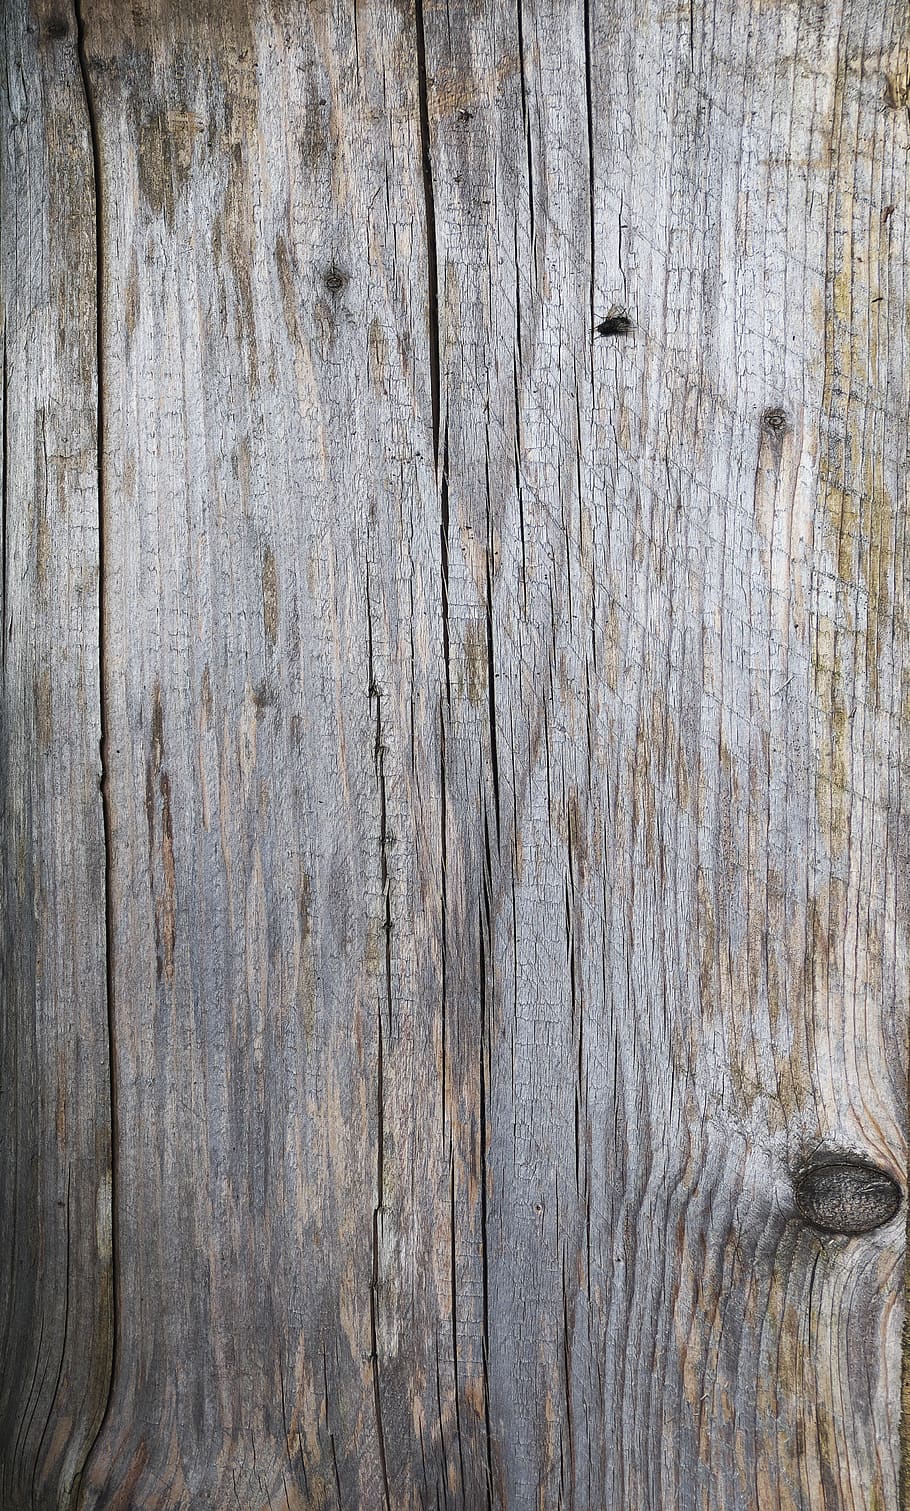 woods, board, wooden board, scarf board, wood element, weathered, dirty, panel, rustic, old